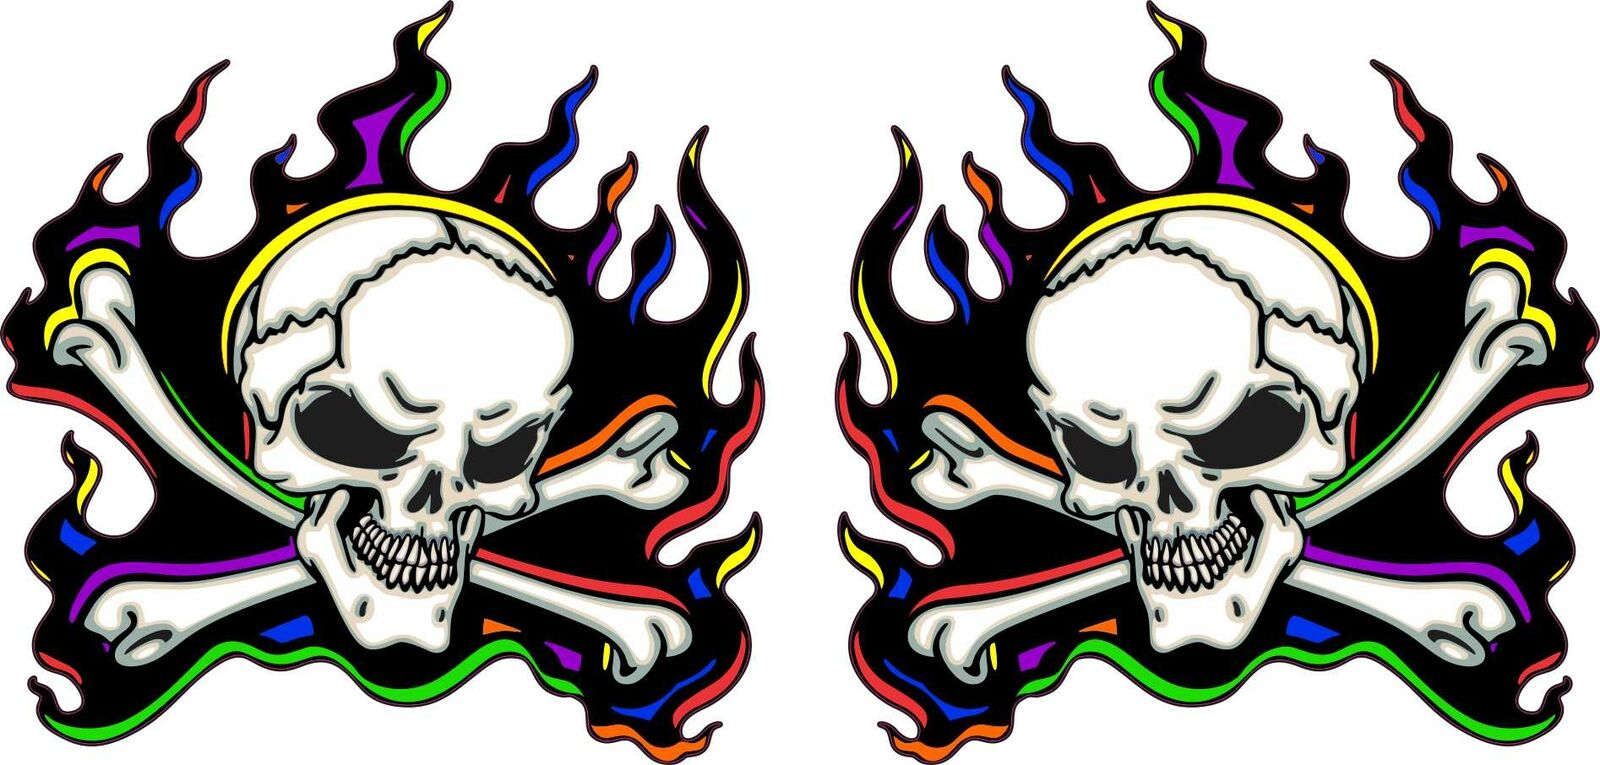 3in x 3in Colorful Flame Skull Vinyl Stickers Laptop Car Vehicle Bumper Decal